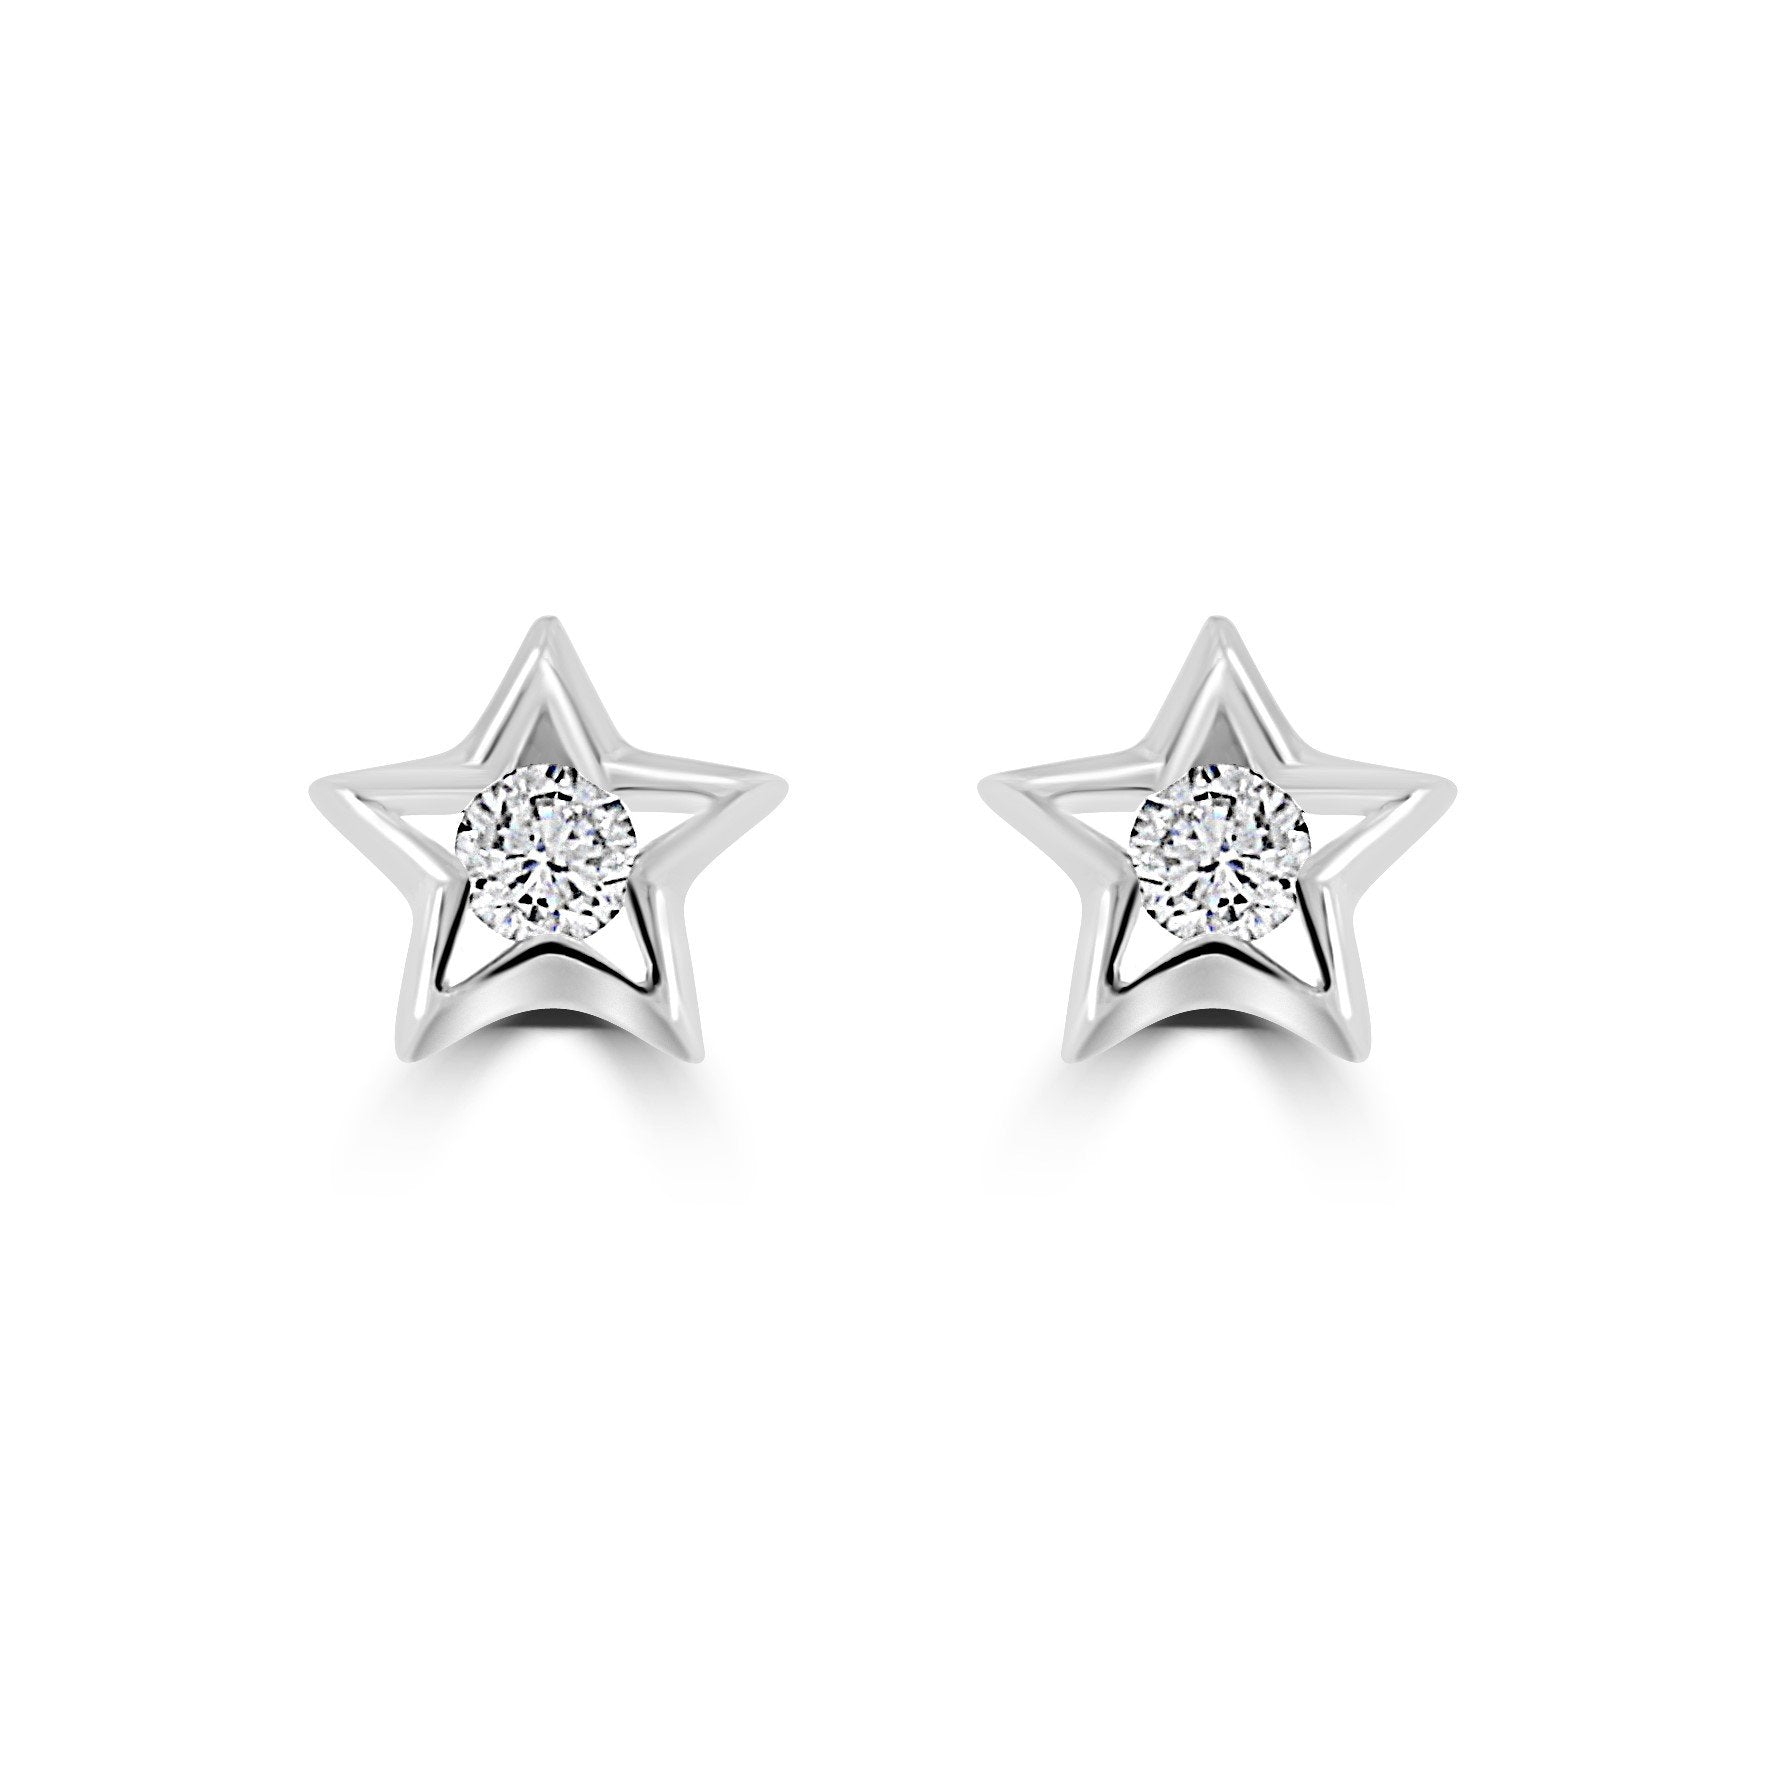 Sterling Silver and CZ Star Earrings Stud